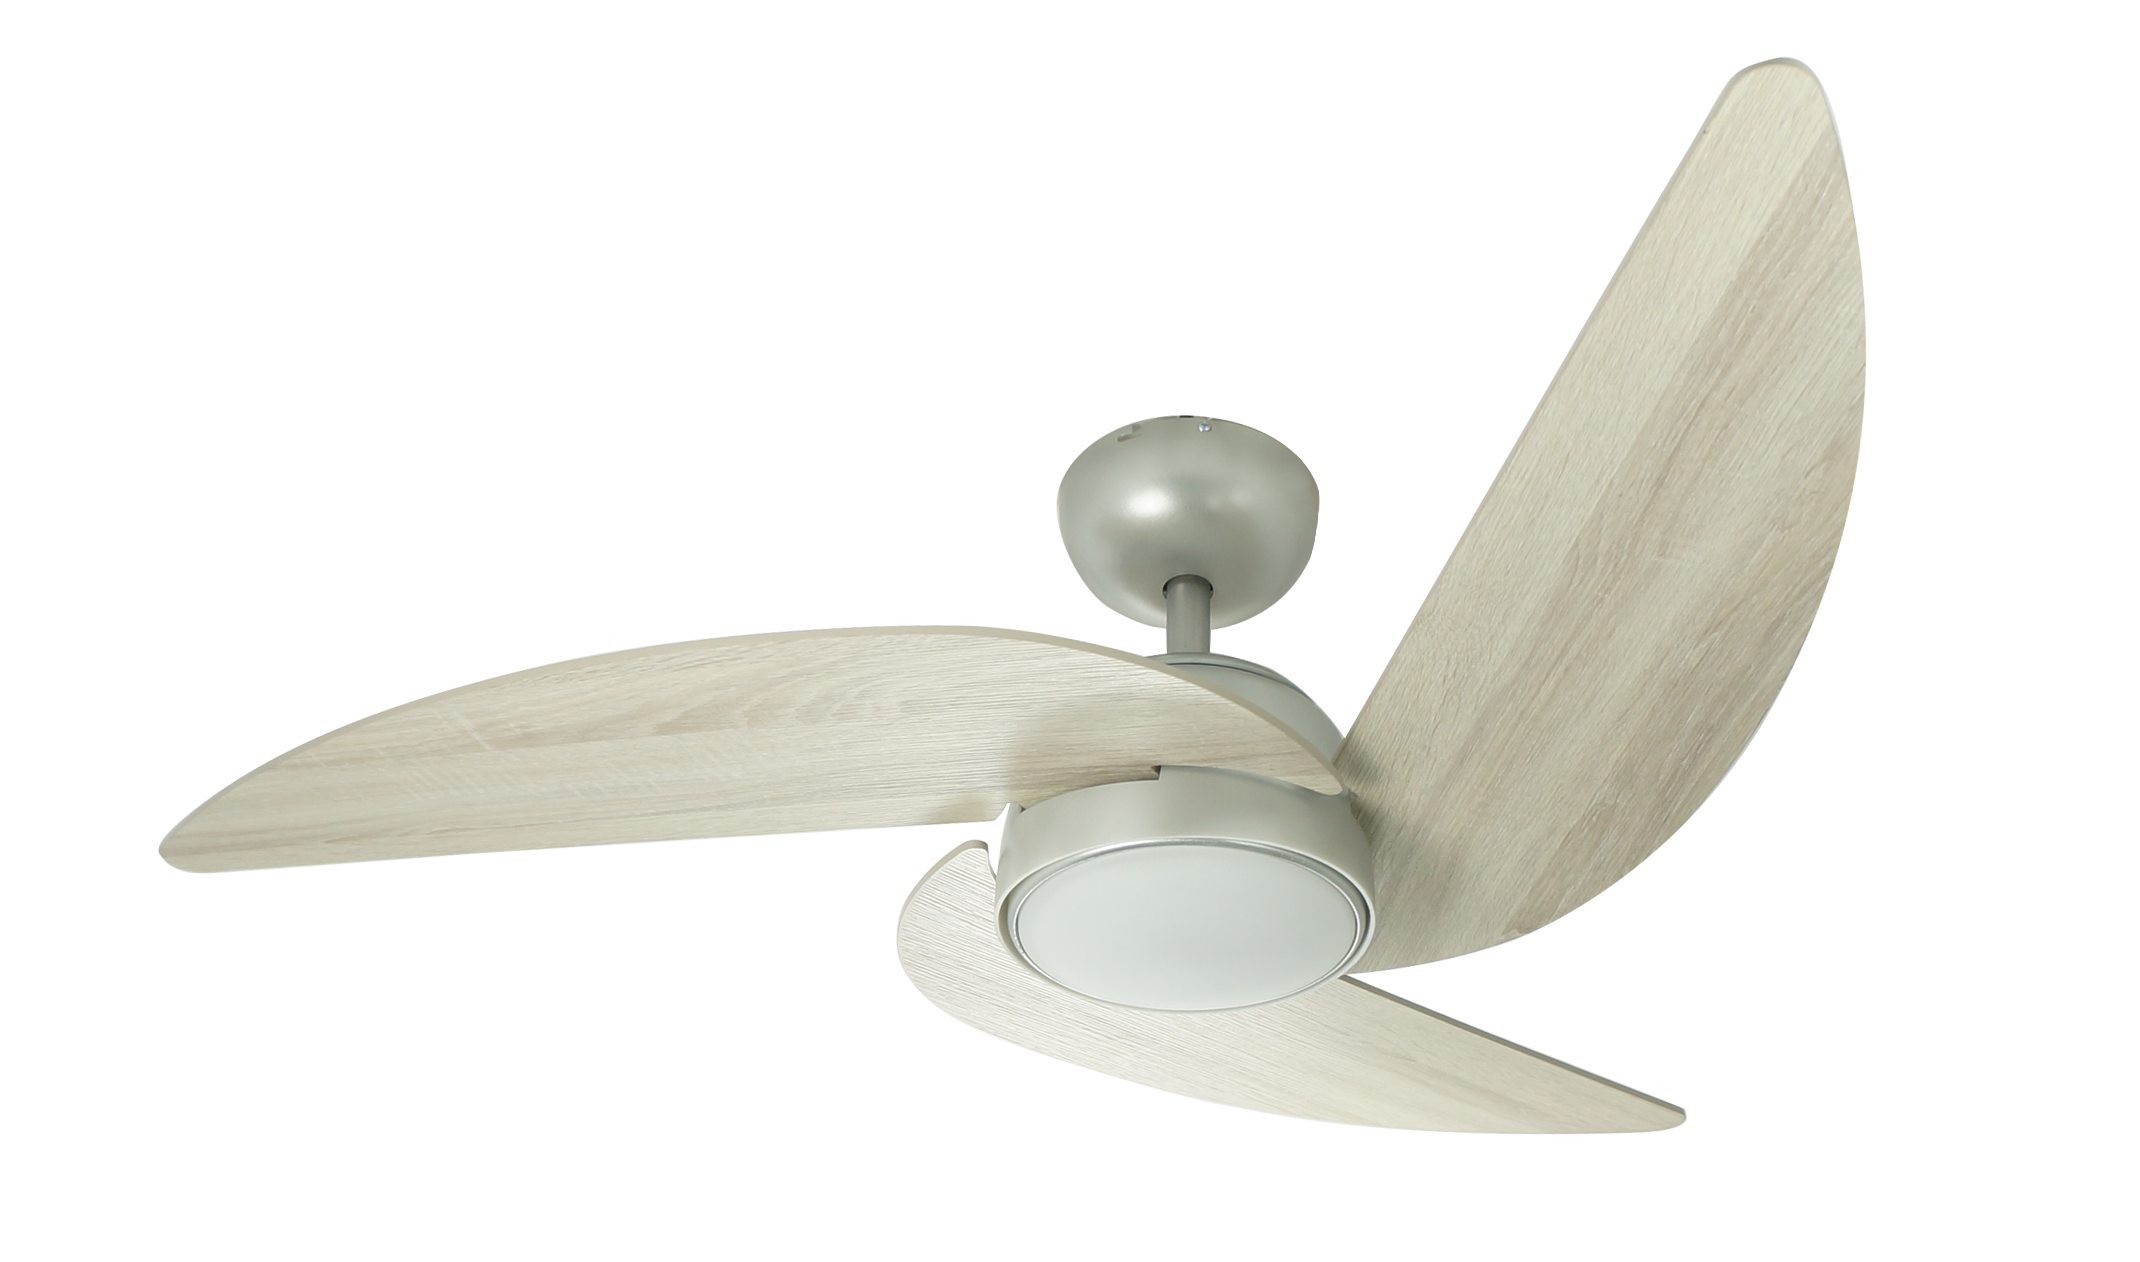 Airbena 45" ABS Ceiling Fan with Light - Perfect for Household Cooling And Illumination